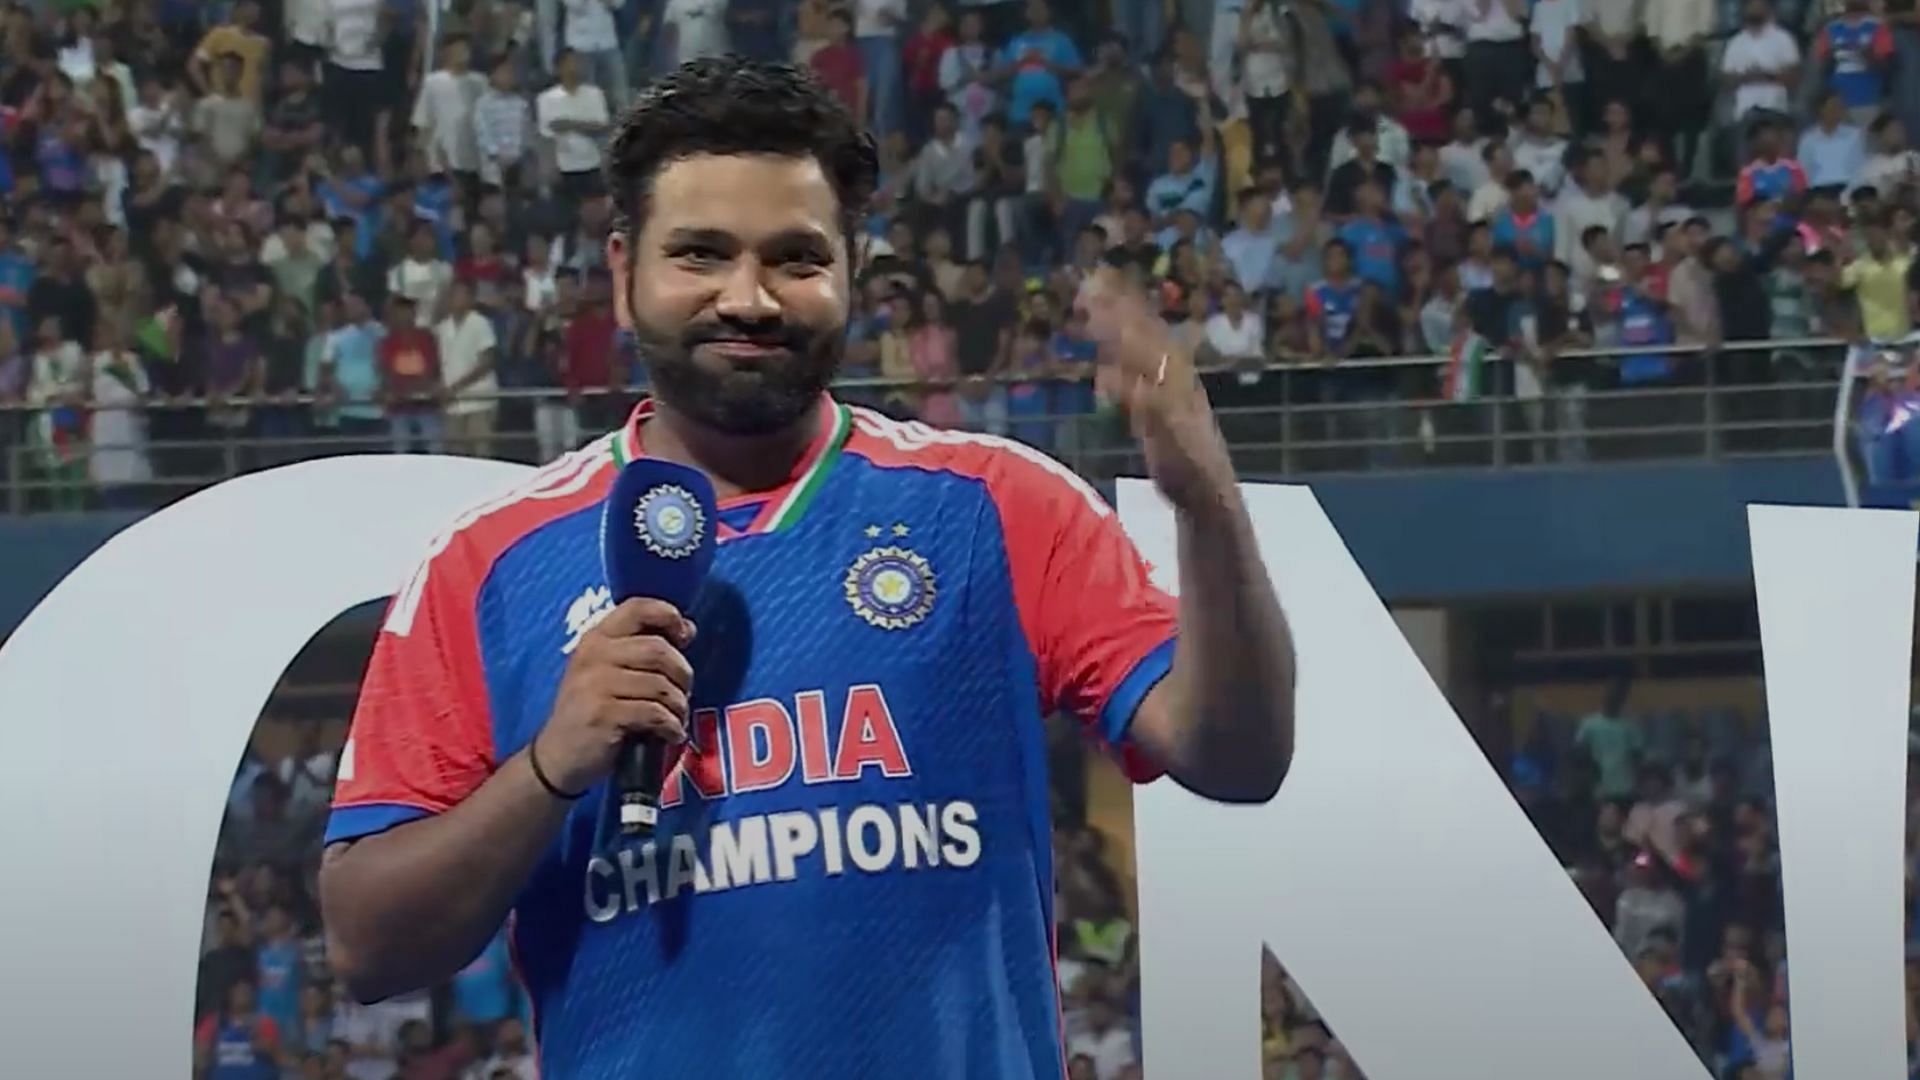 [Watch] Rohit Sharma taken aback by thunderous reception at Wankhede after T20 World Cup win bus parade